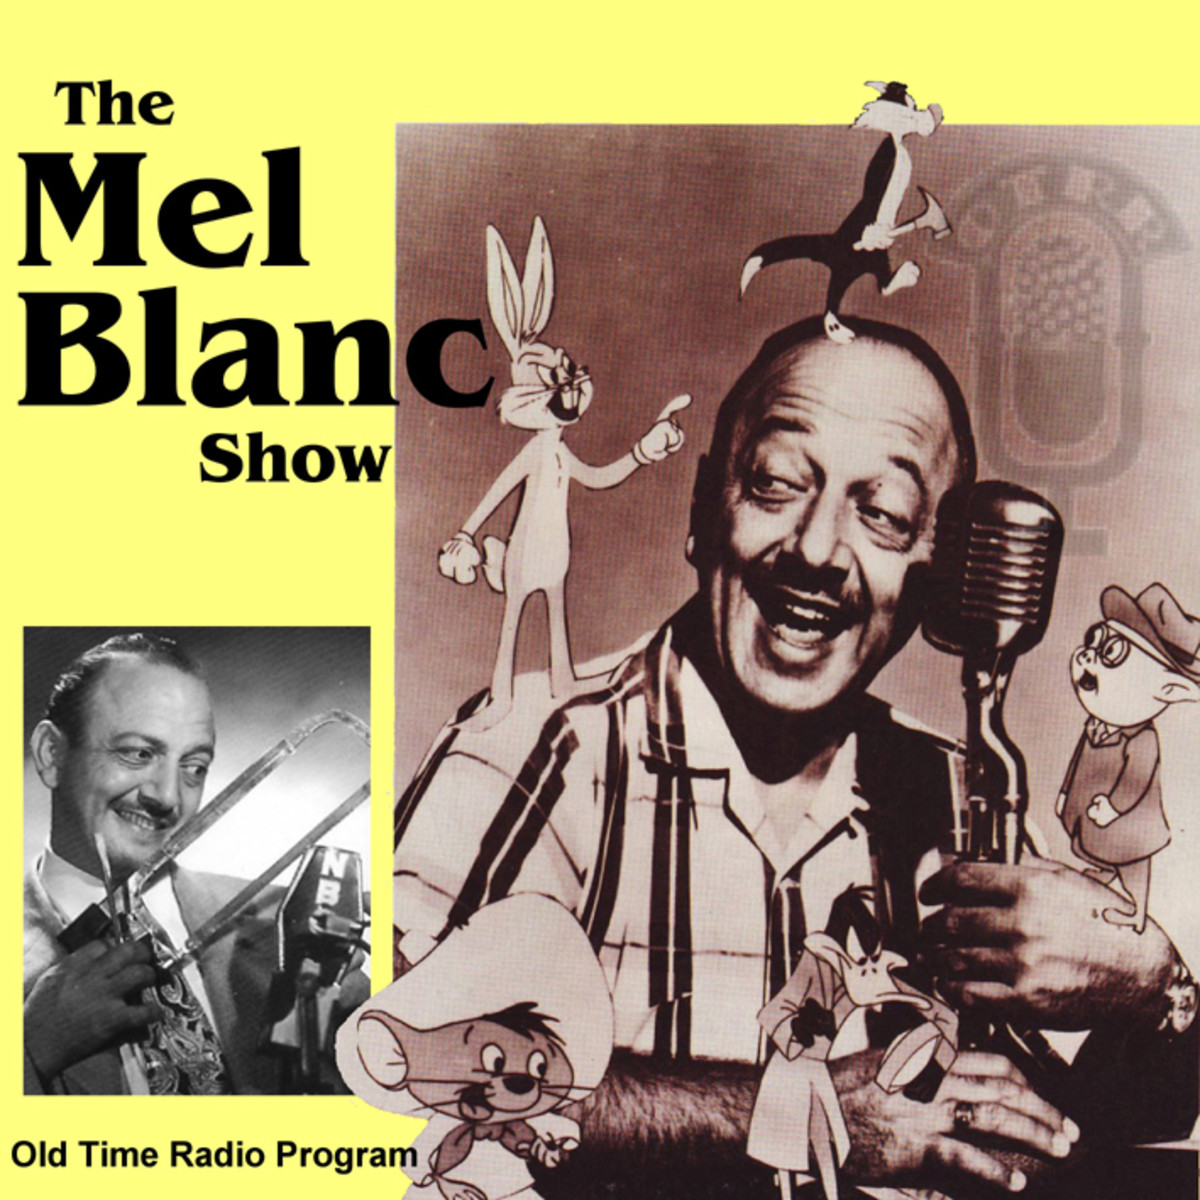 Mel Blanc: "The Man with a Thousand Voices", started on radio, branched into cartoon animation and then into movies.